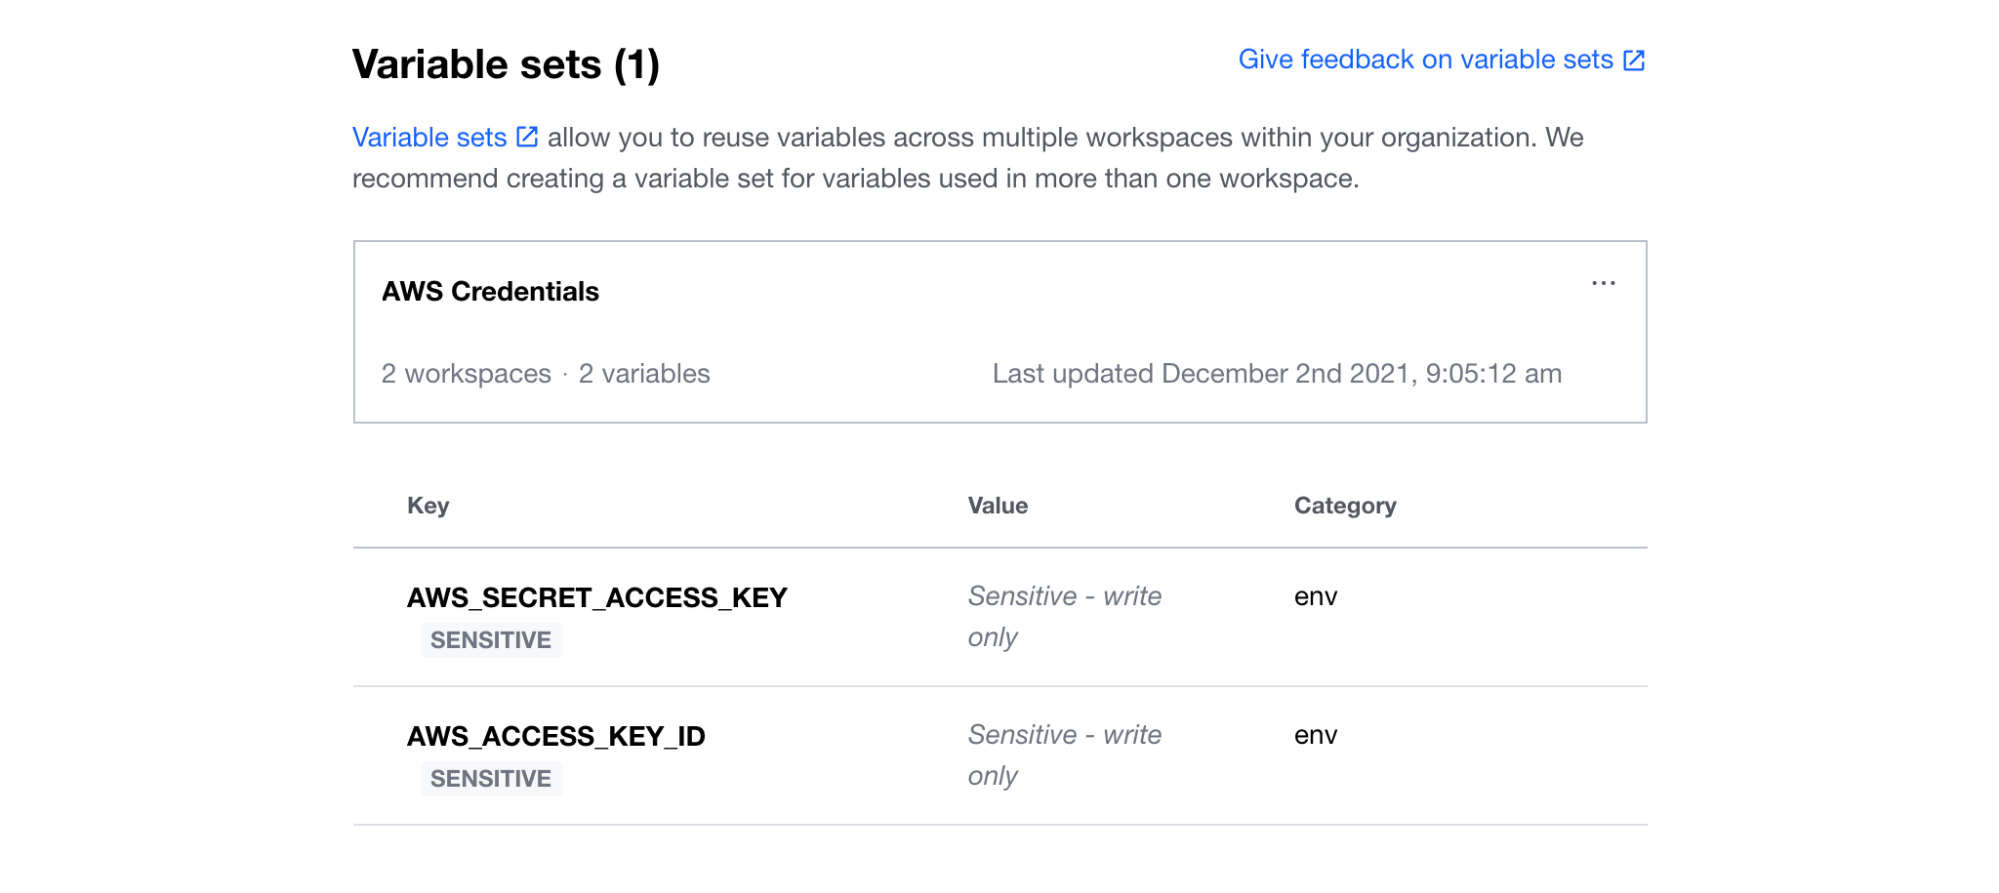 The `learn-terraform-s3-migrate-tfc-main` workspace contains the AWS Credentials variable set to authenticate the workspace to AWS